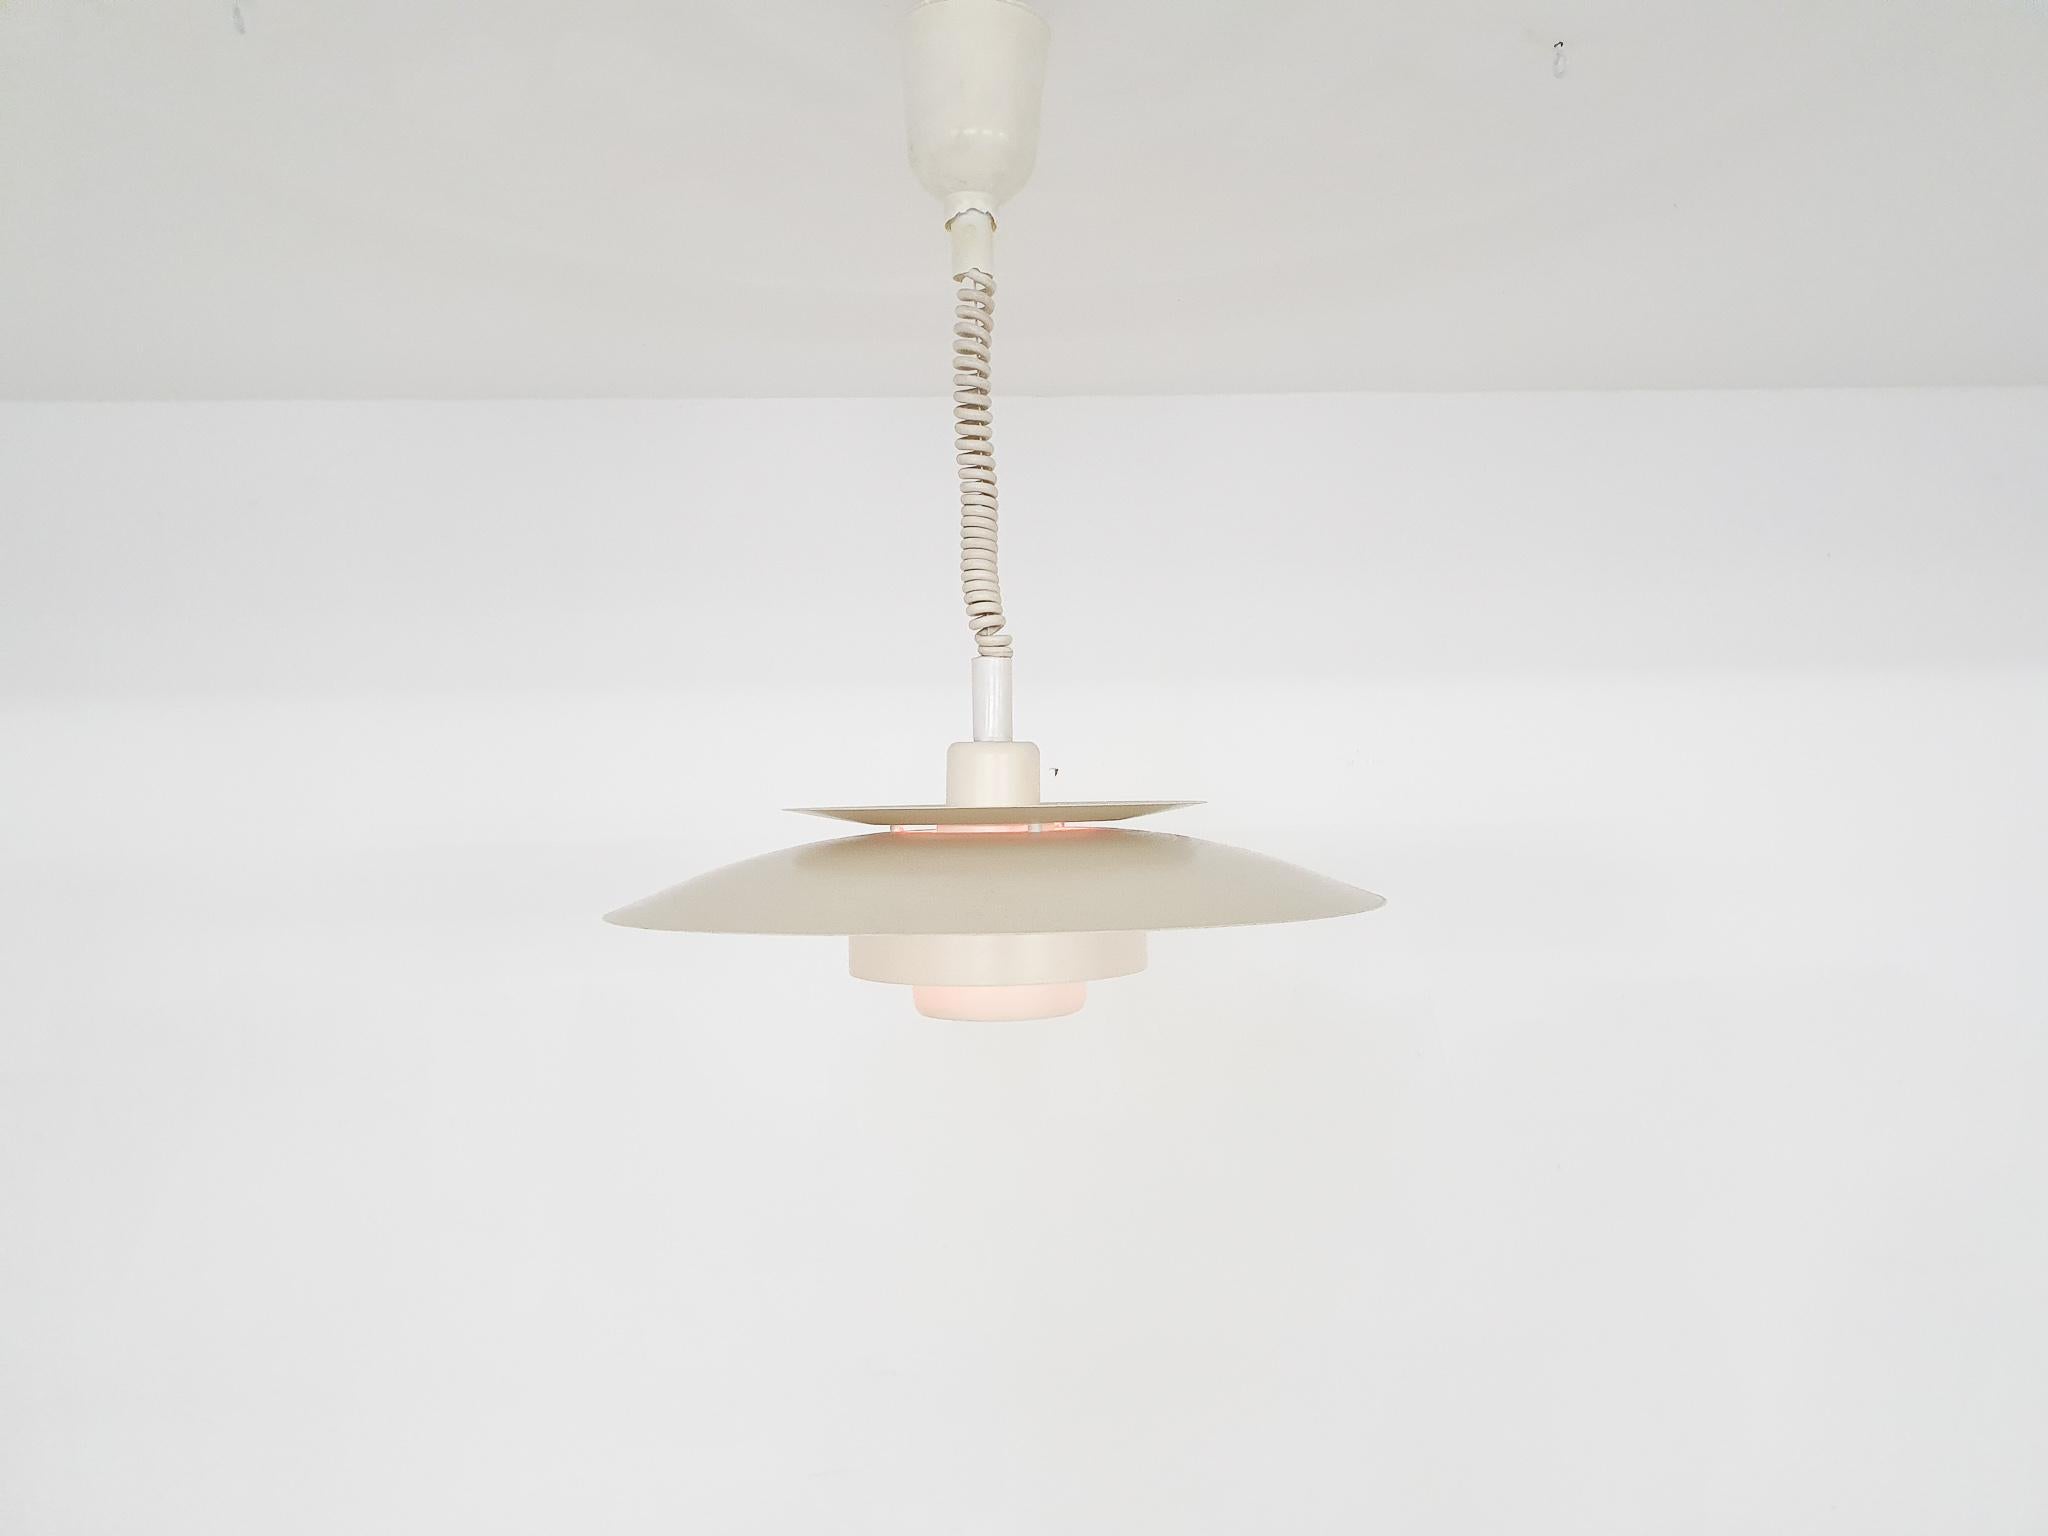 White aluminum pendant light by Simon P. Henningsen for Lyskaer Belysning.
The lamp can be adjusted in height form 60 to 154 cm. The original plastic ceiling cap is damaged, but can be changed.